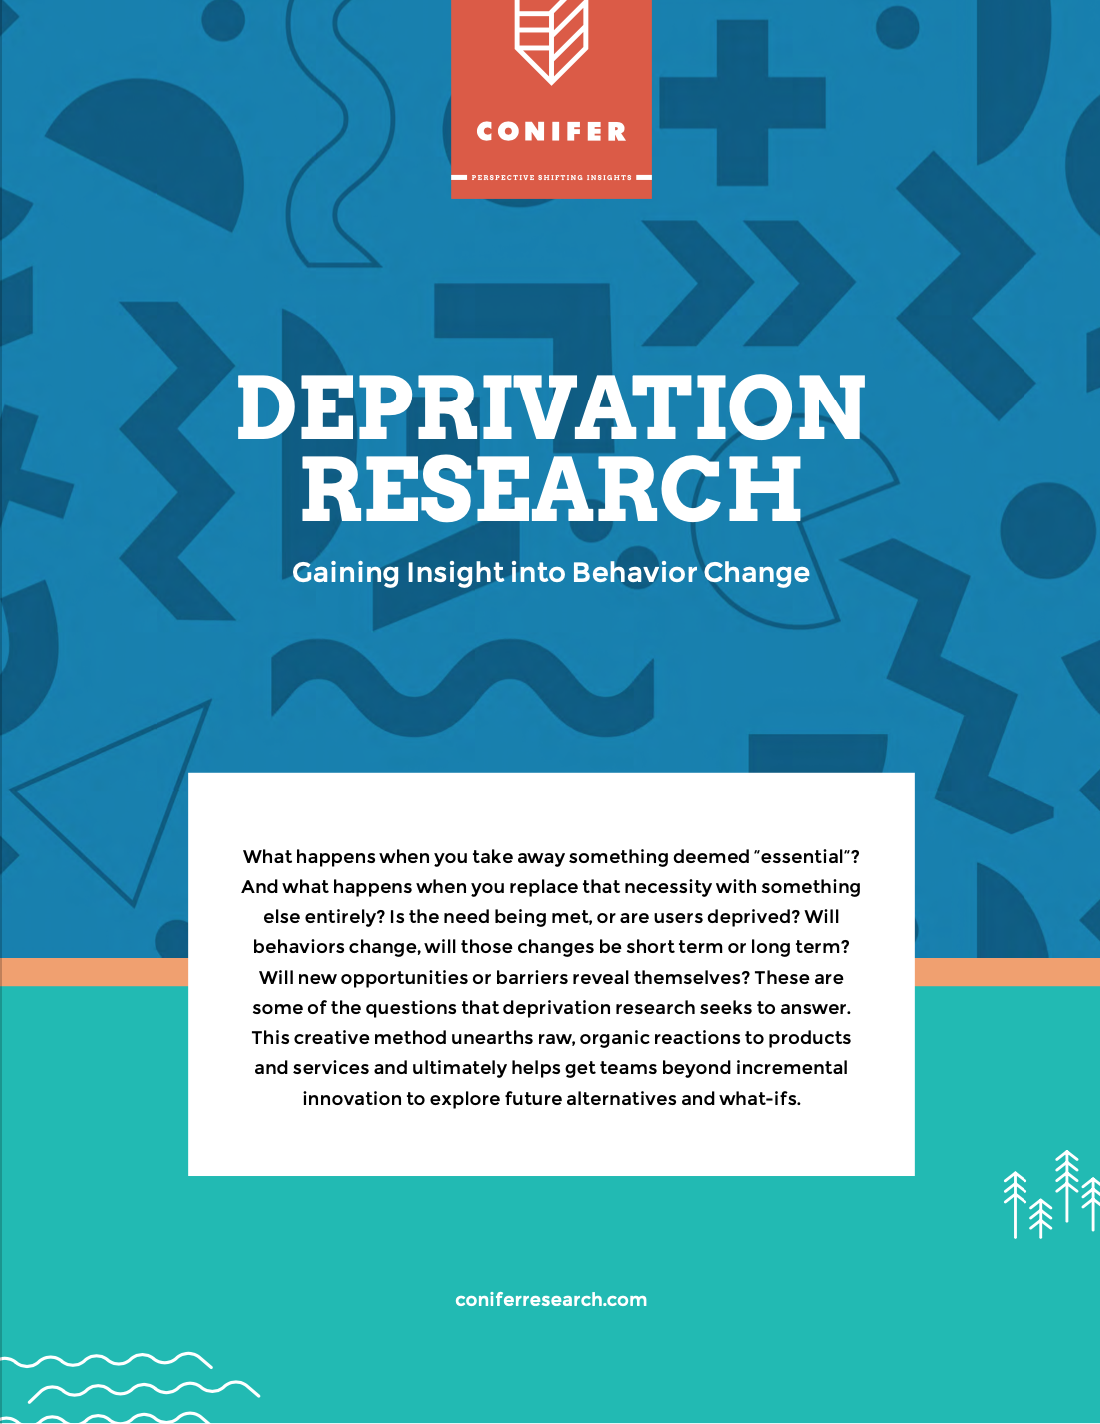 Deprivation Research guide